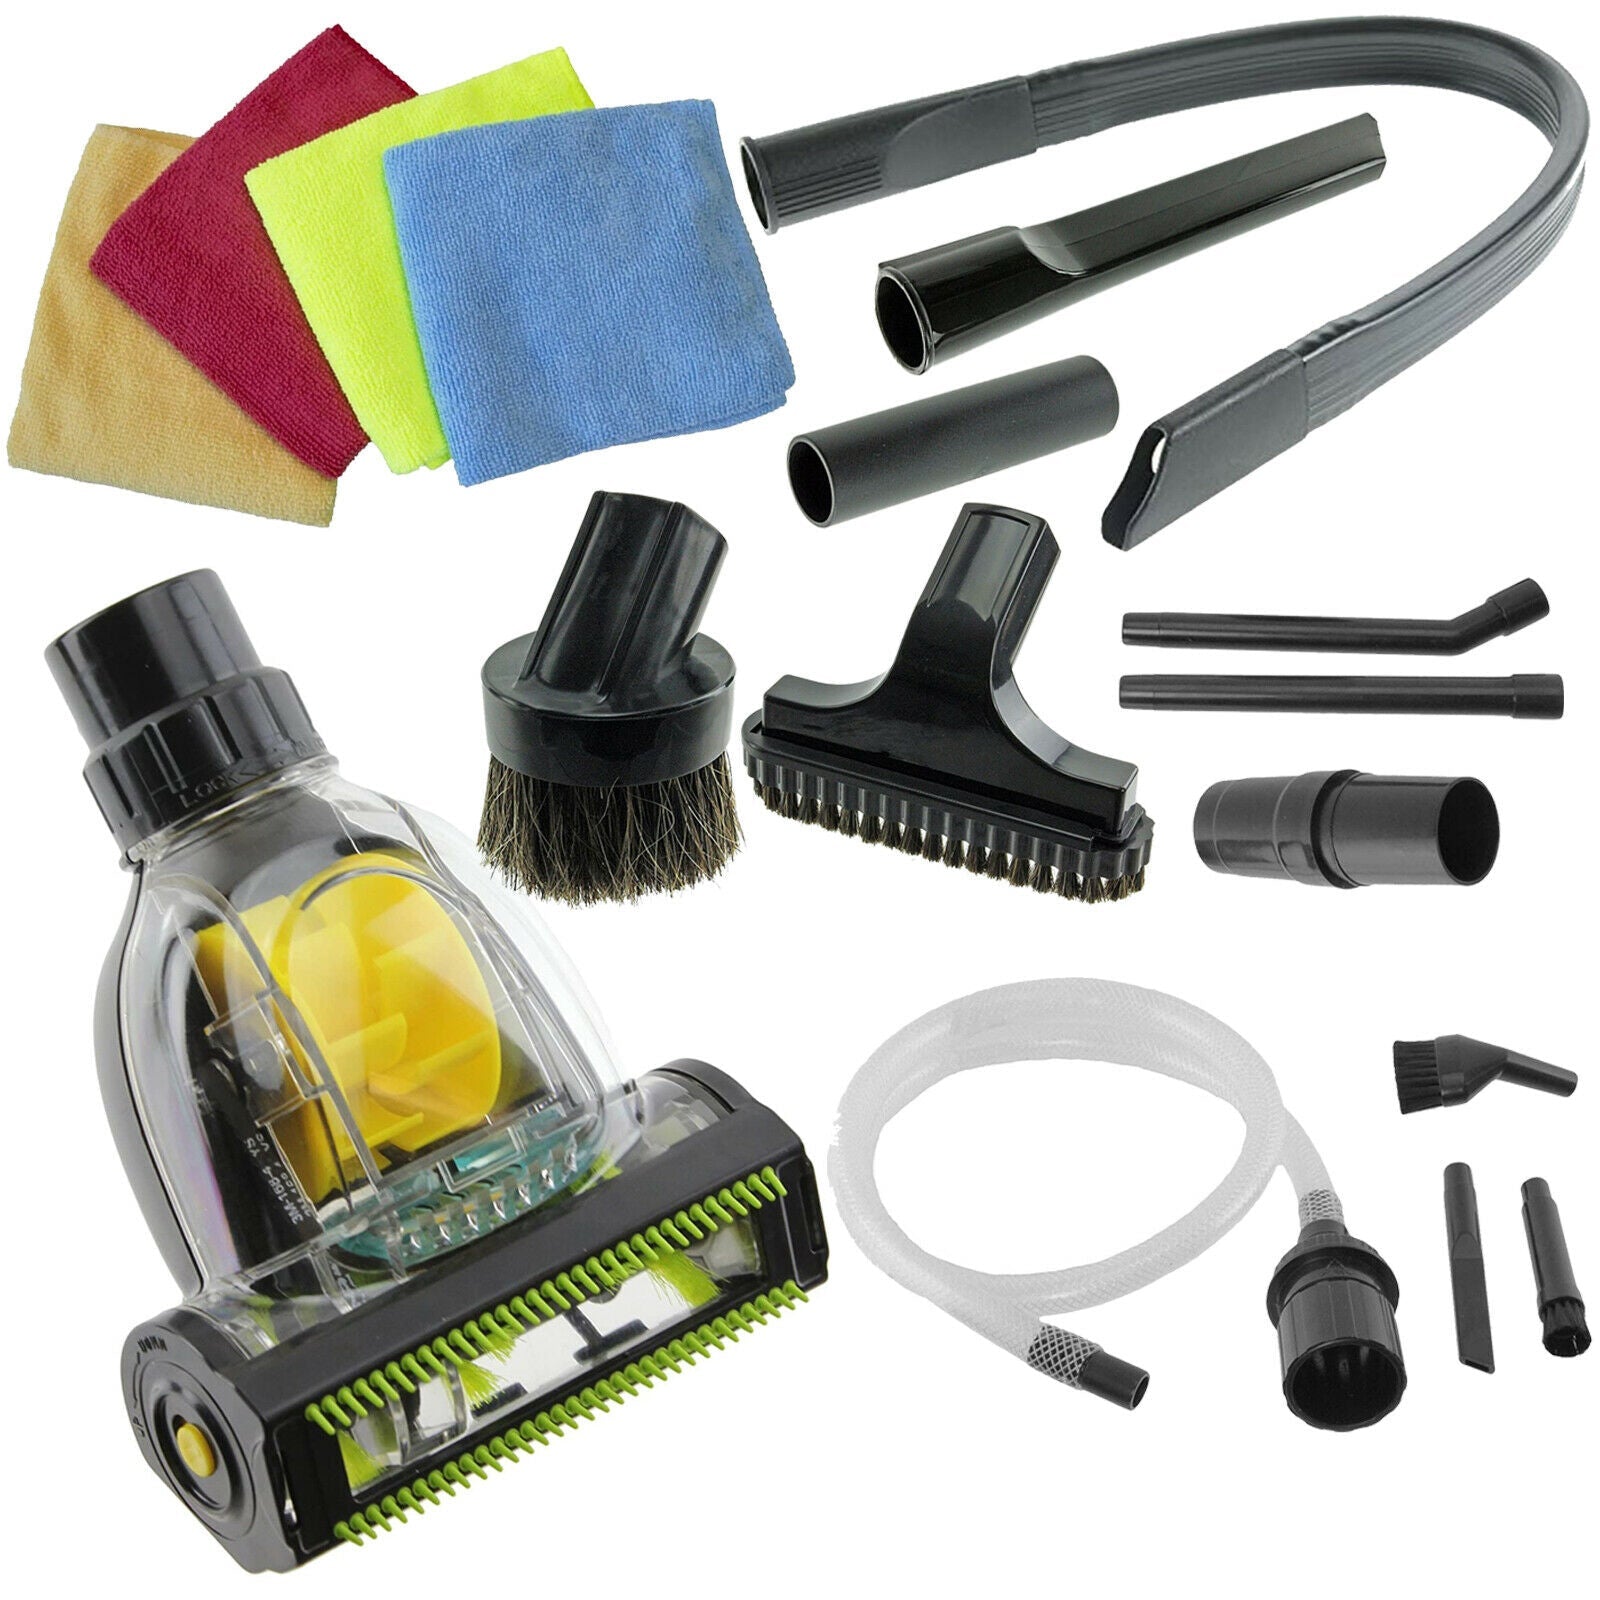 Car Detailing Complete Valet Kit with Micro Tools & Cloths compatible with ZANUSSI Vacuum Cleaner (32mm)